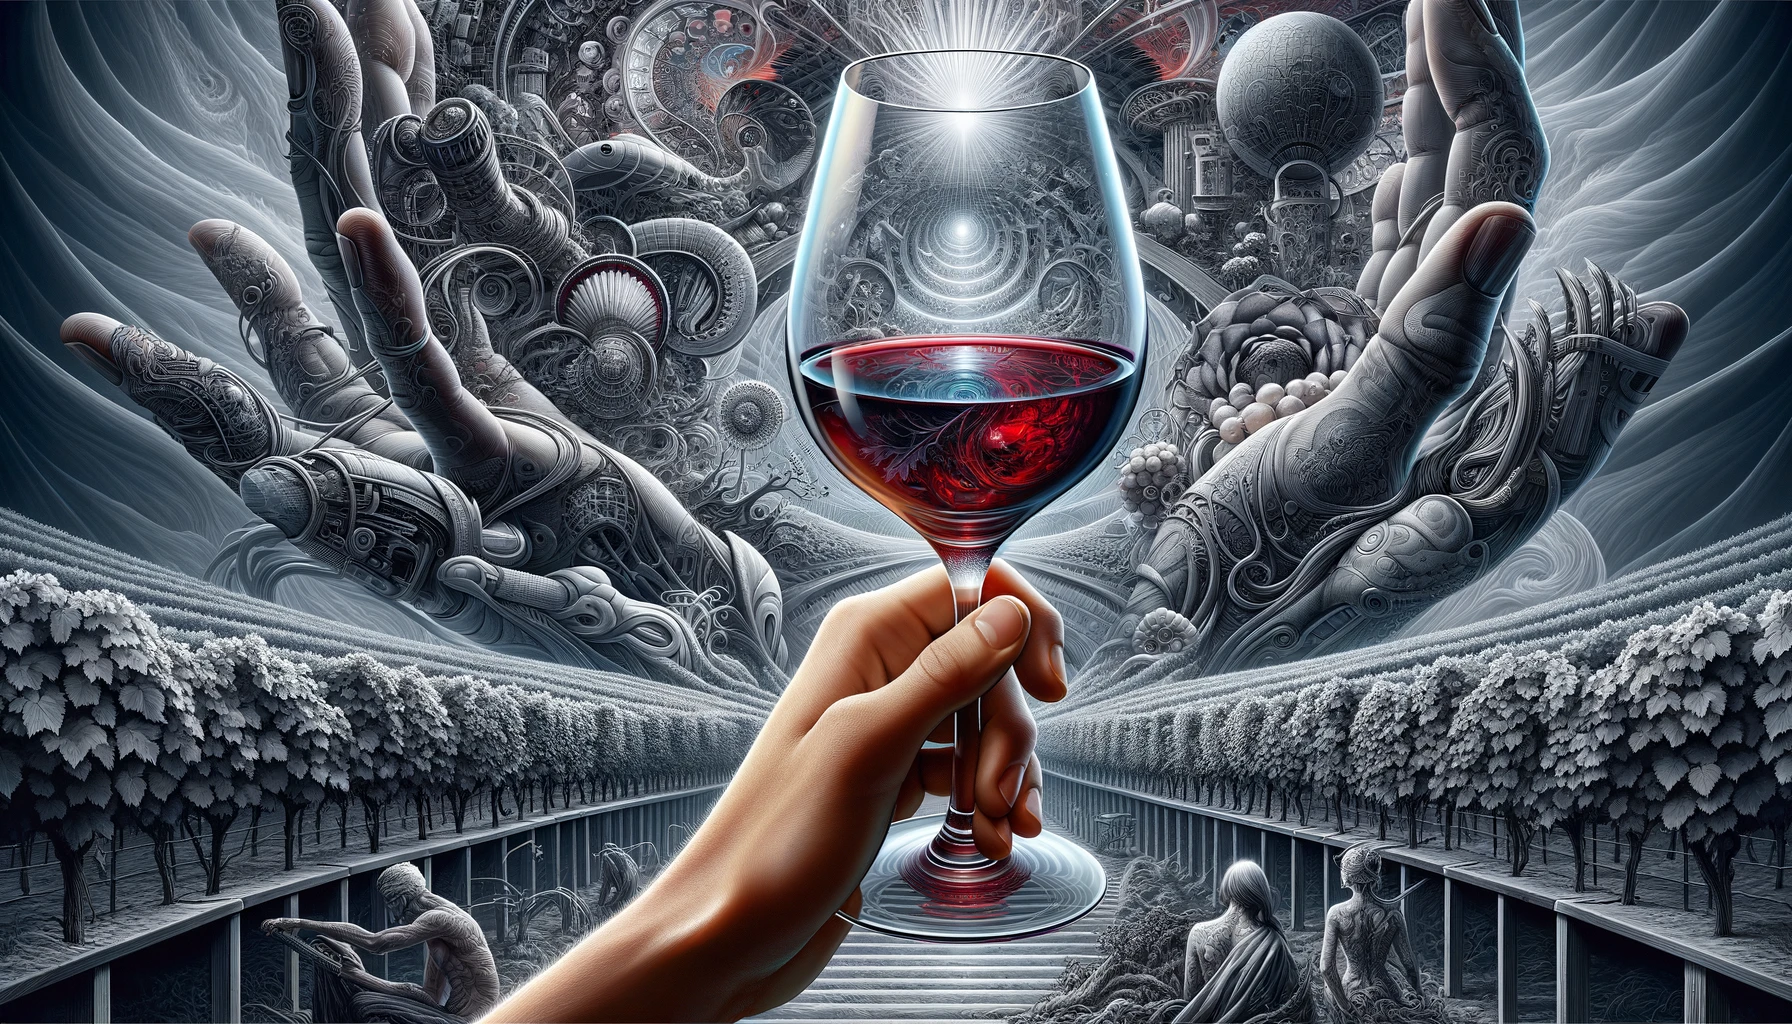  close-up scene of a hand holding a UV-resistant wine glass filled with red wine, showcasing the clarity of the glass and its ability to shield the wine from UV rays, set against a backdrop of vineyards 